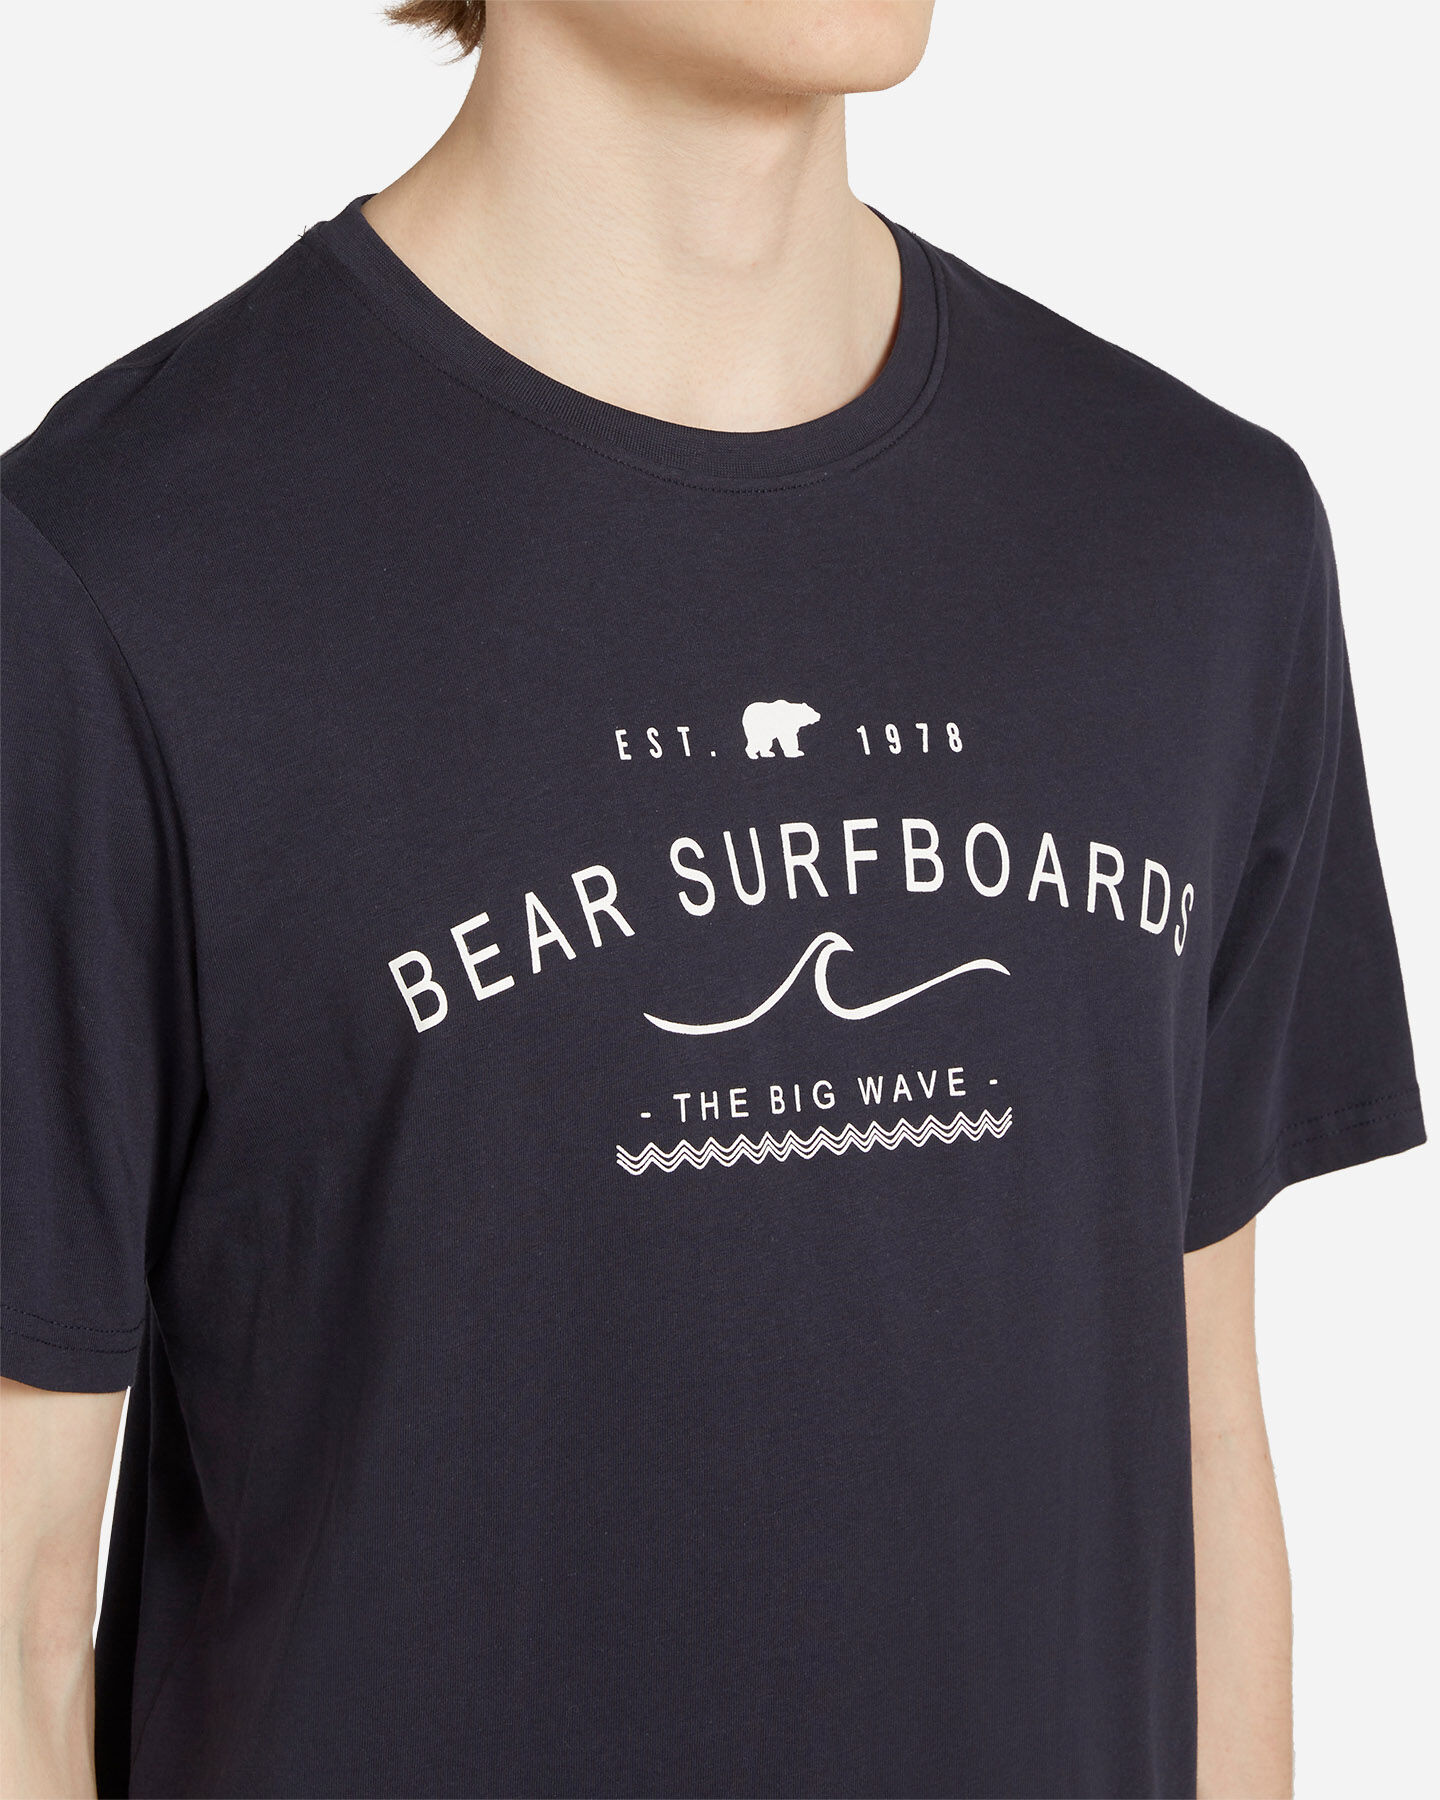  T-Shirt BEAR SURFER CONCEPT M S4122045|914|S scatto 4